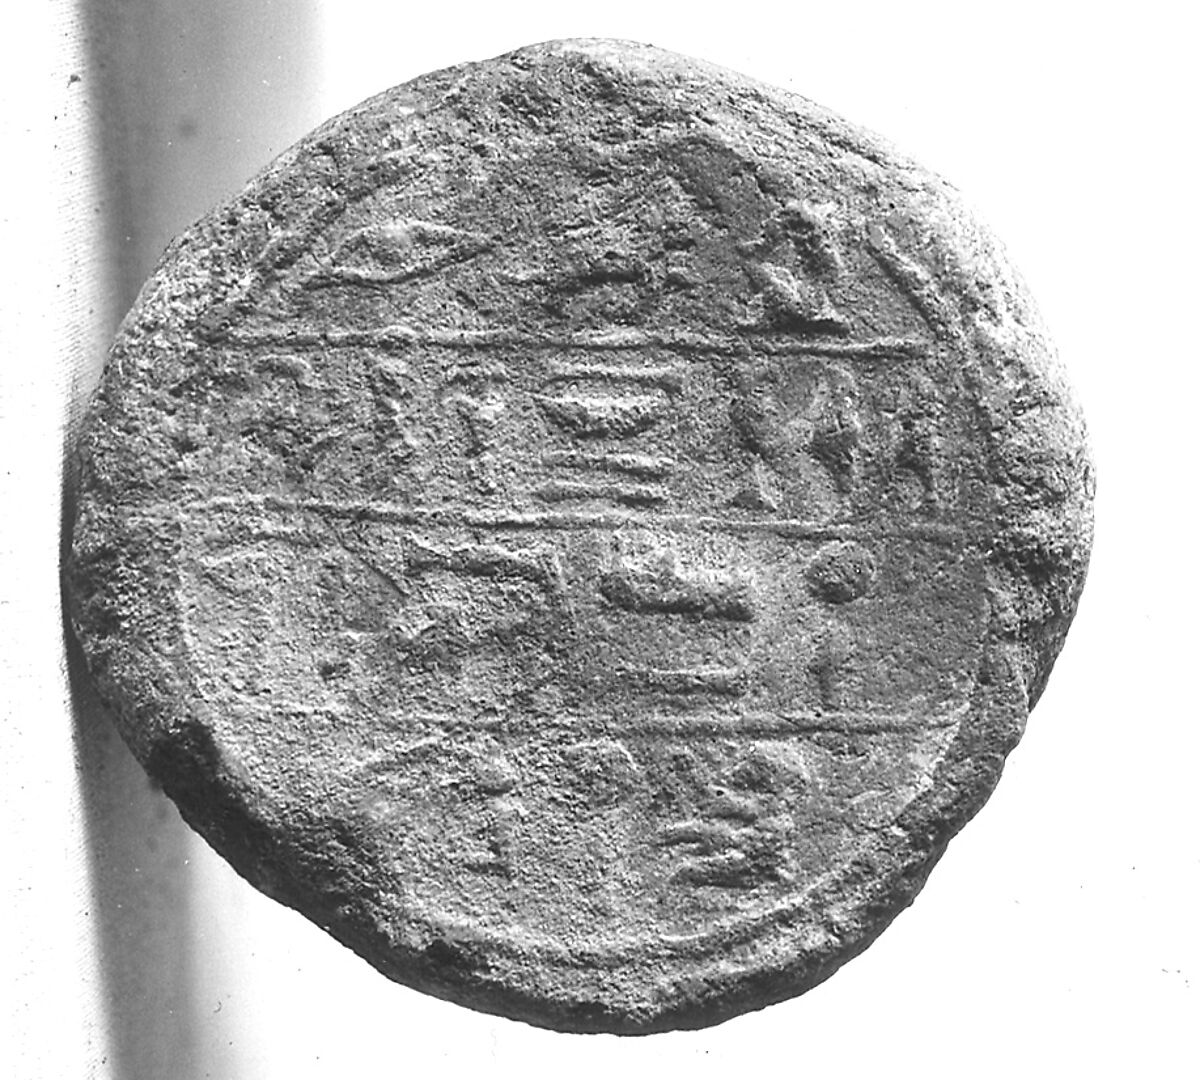 Funerary Cone of Re, Pottery 